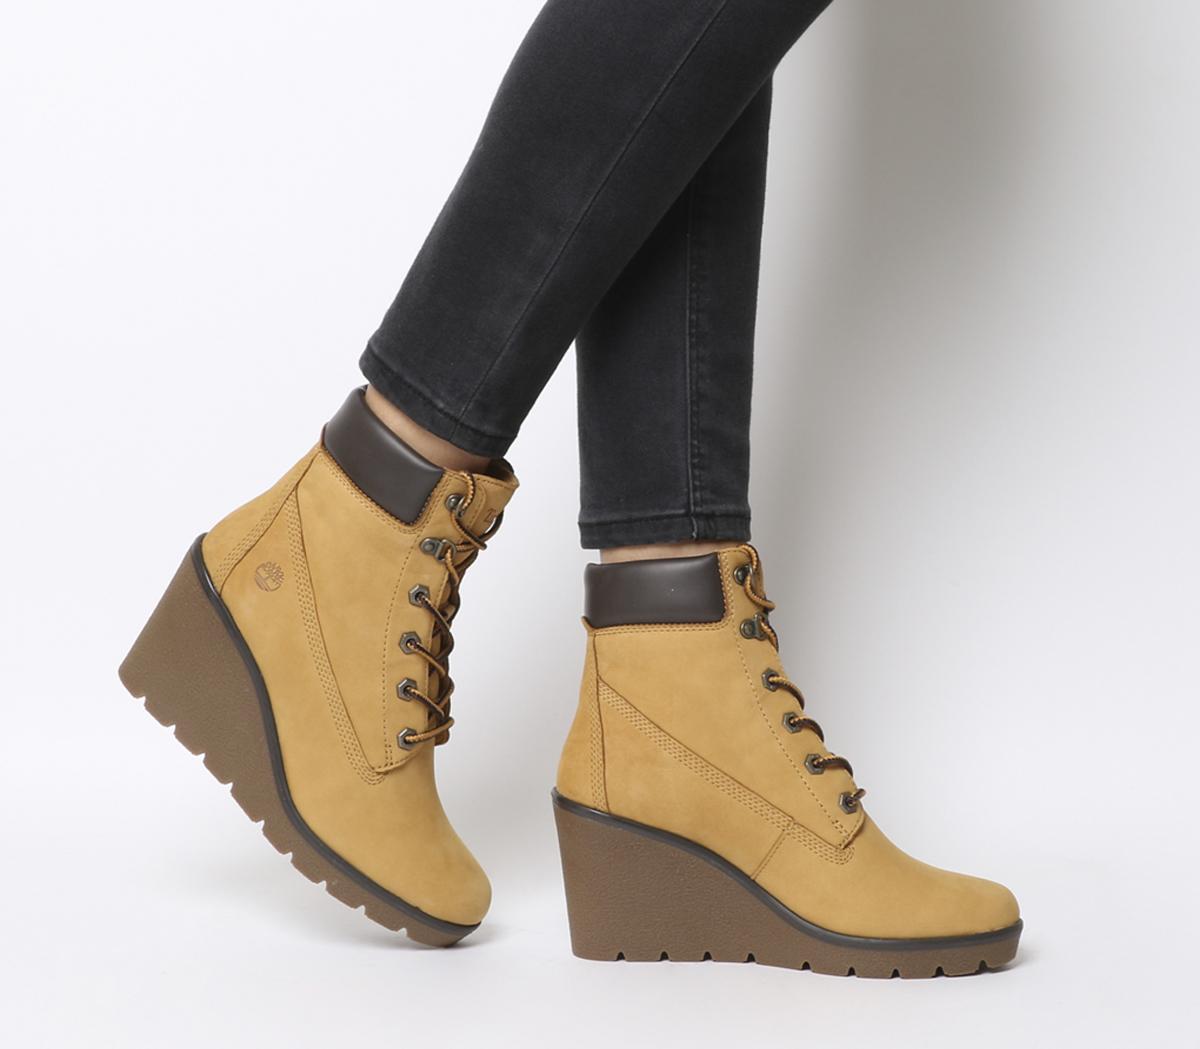 timberland wedges